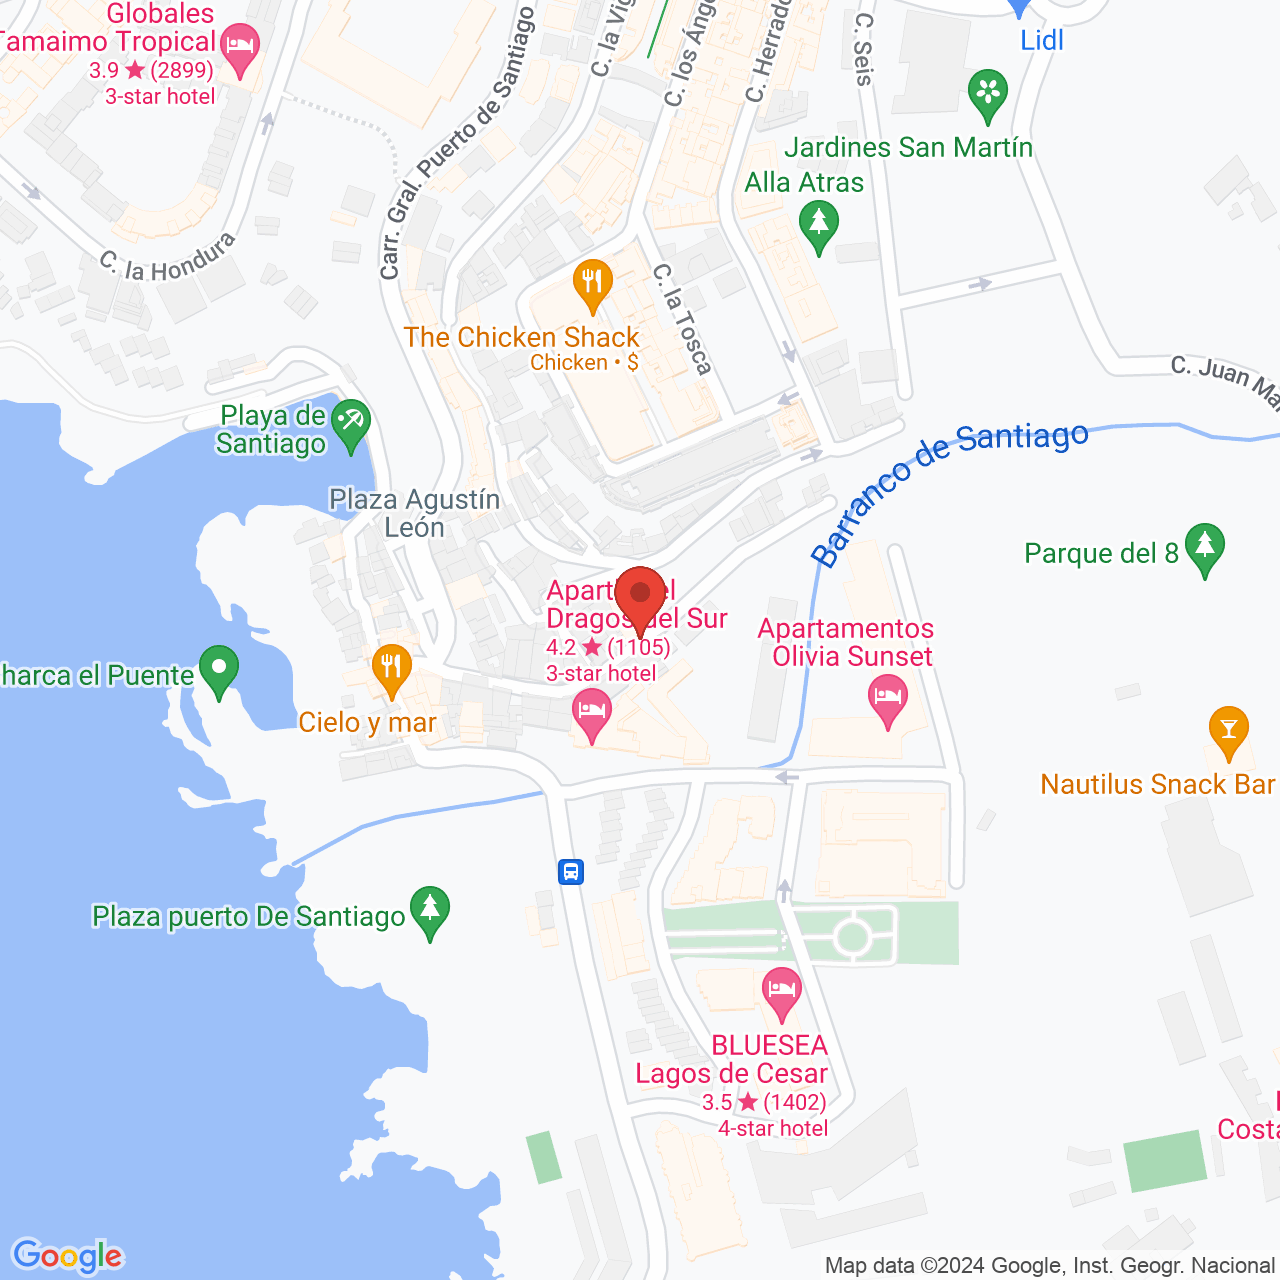 https://maps.googleapis.com/maps/api/staticmap?zoom=10&maptype=hybrid&scale=4&center=28.2361956,-16.8411272&markers=color:red%7C%7C28.2361956,-16.8411272&size=1000x1000&key=AIzaSyAQg6Liu52-a7wn17F9B-5c4QmJ9kTO3Mo